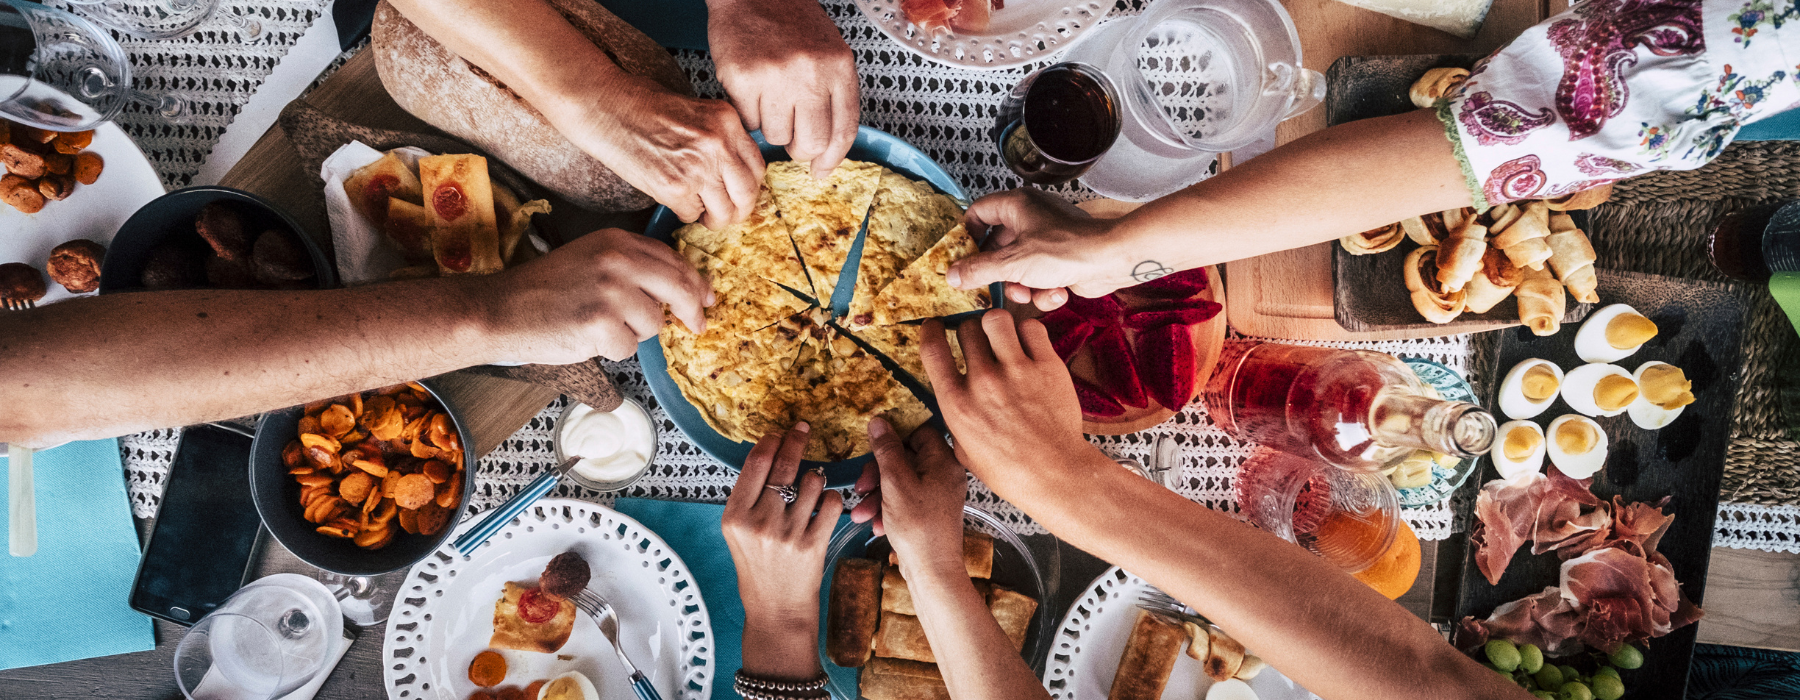 people with hands in together at a dinner table eating